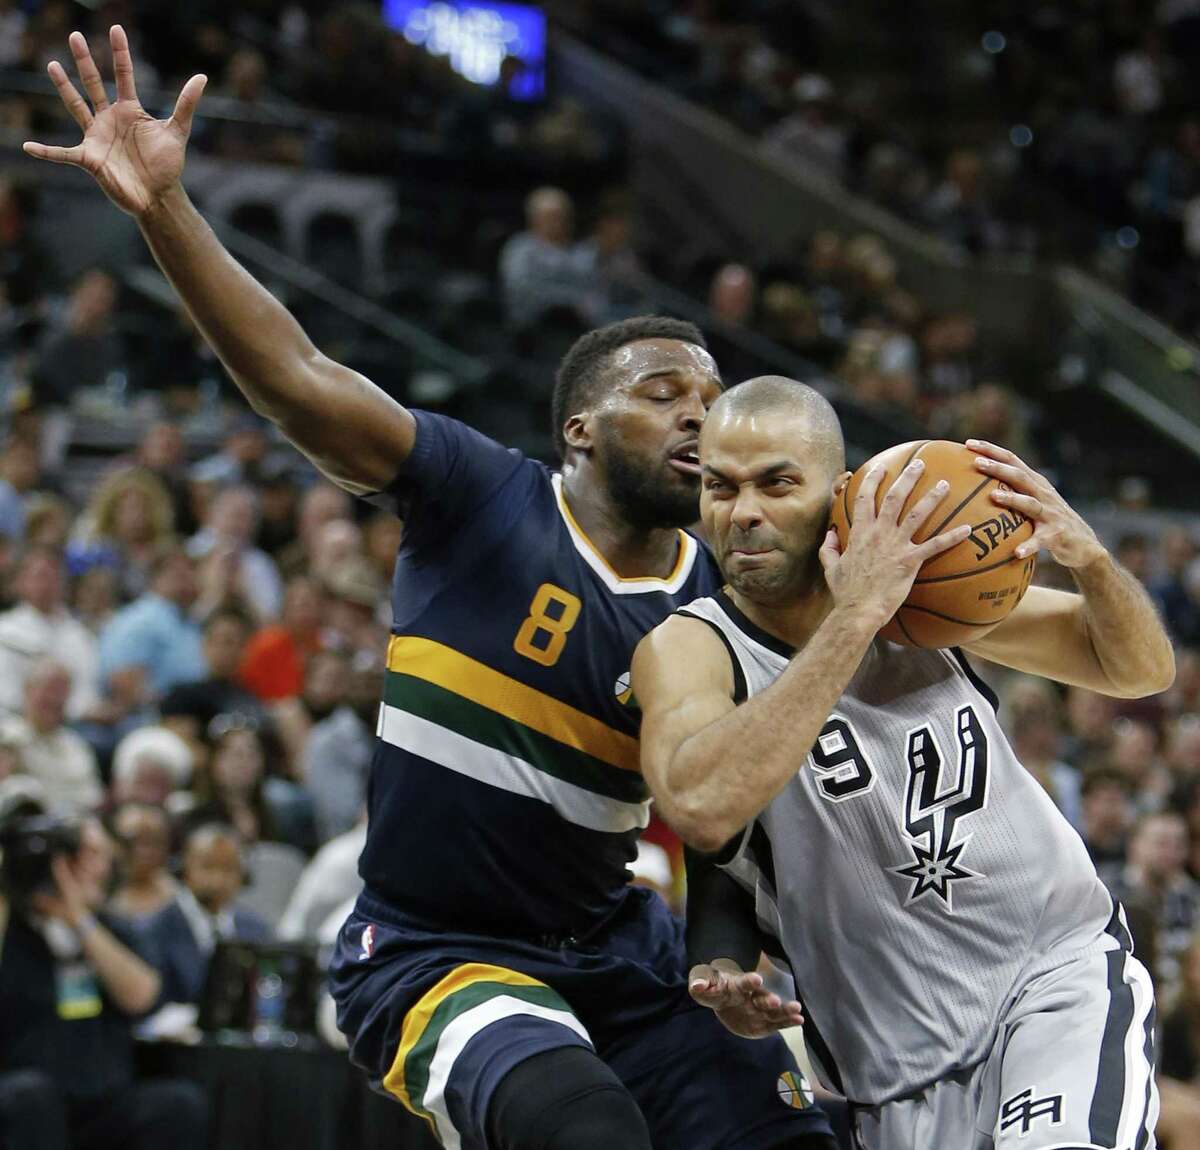 Spurs’ Tony Parker looks for room around the Utah Jazz’s Shelvin Mack during their game April 2, 2017 at the AT&T Center.